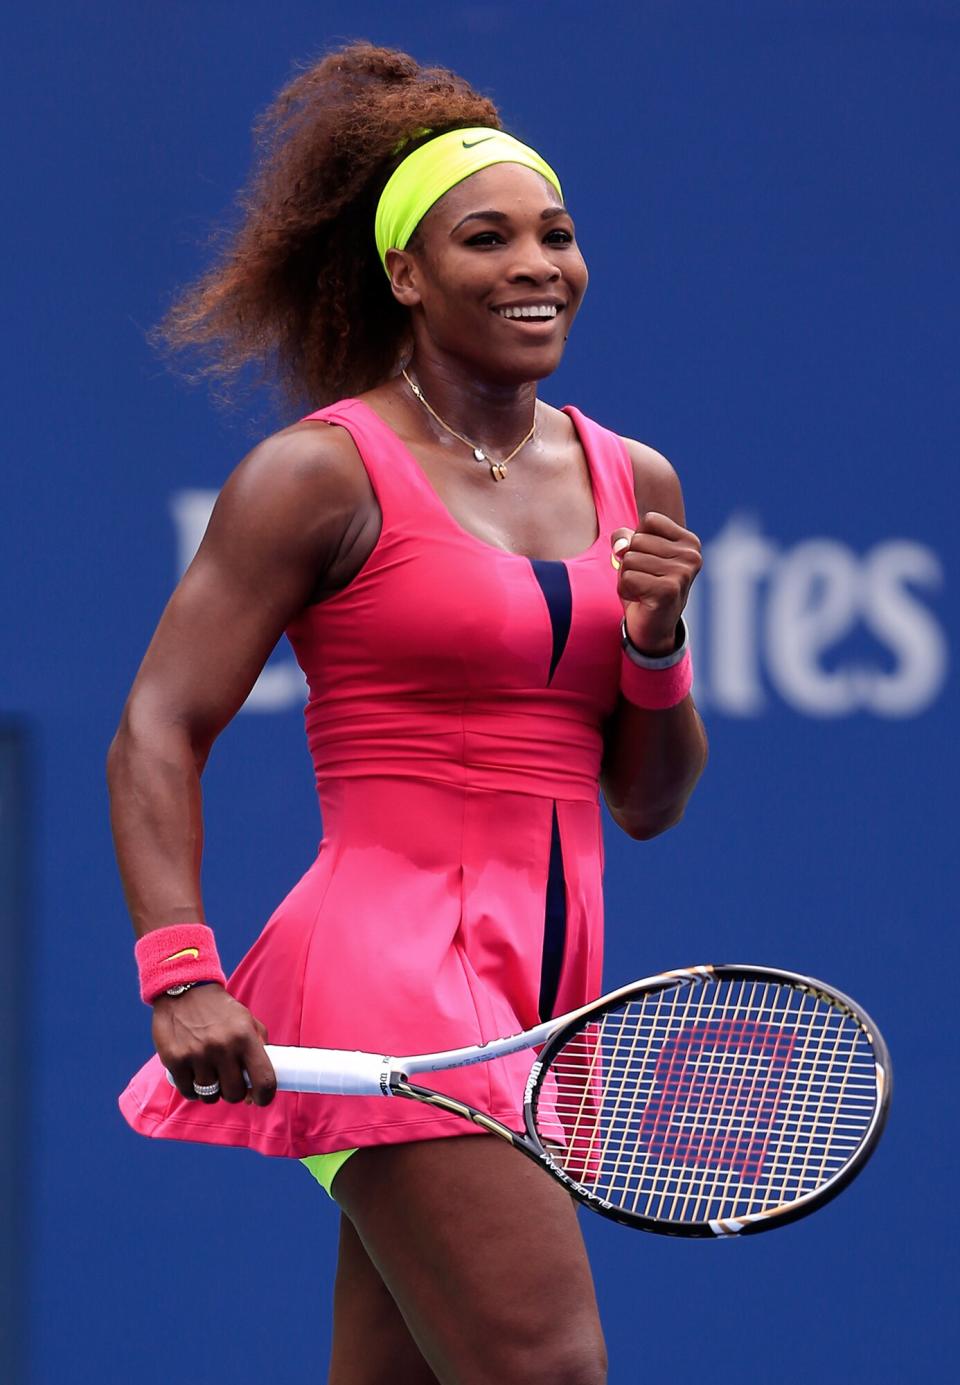 Serena Williams of the United States reacts after defeating Andrea Hlavackova of Czech Republic during their women's singles fourth round match on Day Eight of the 2012 U.S. Open at the USTA Billie Jean King National Tennis Center on September 3, 2012 in the Flushing neighborhood, of the Queens borough of New York City